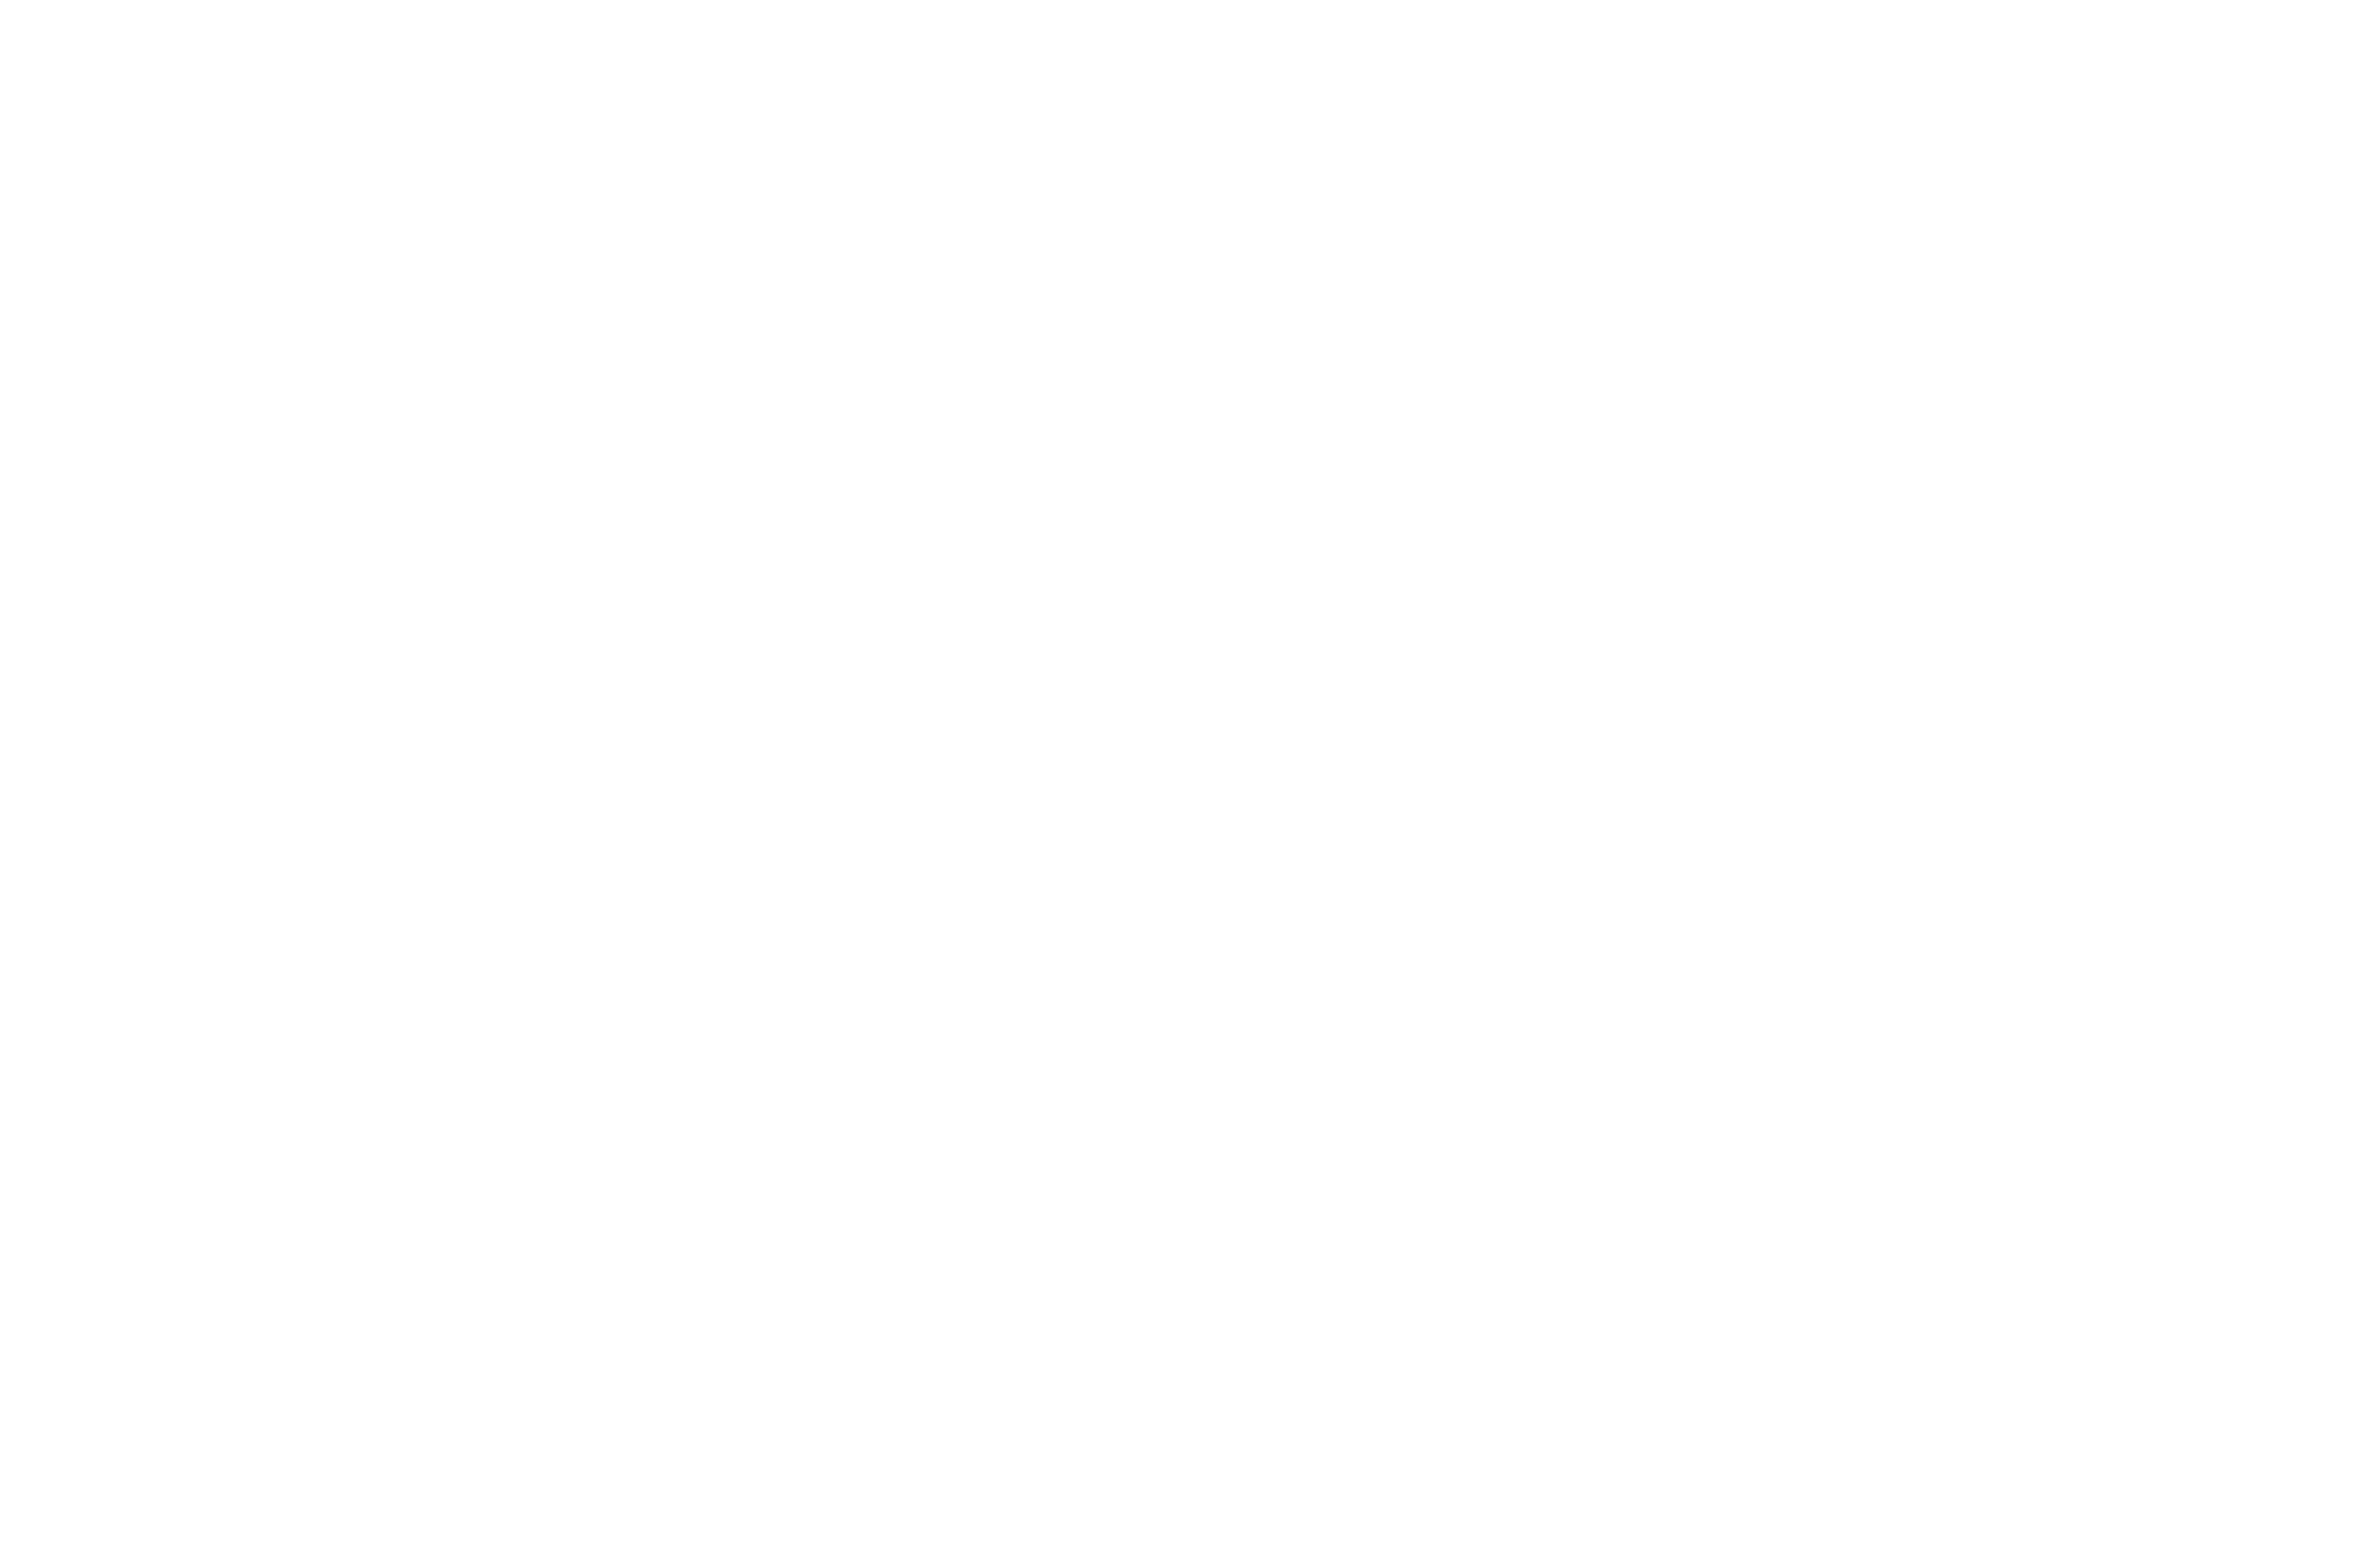 Made with Unity